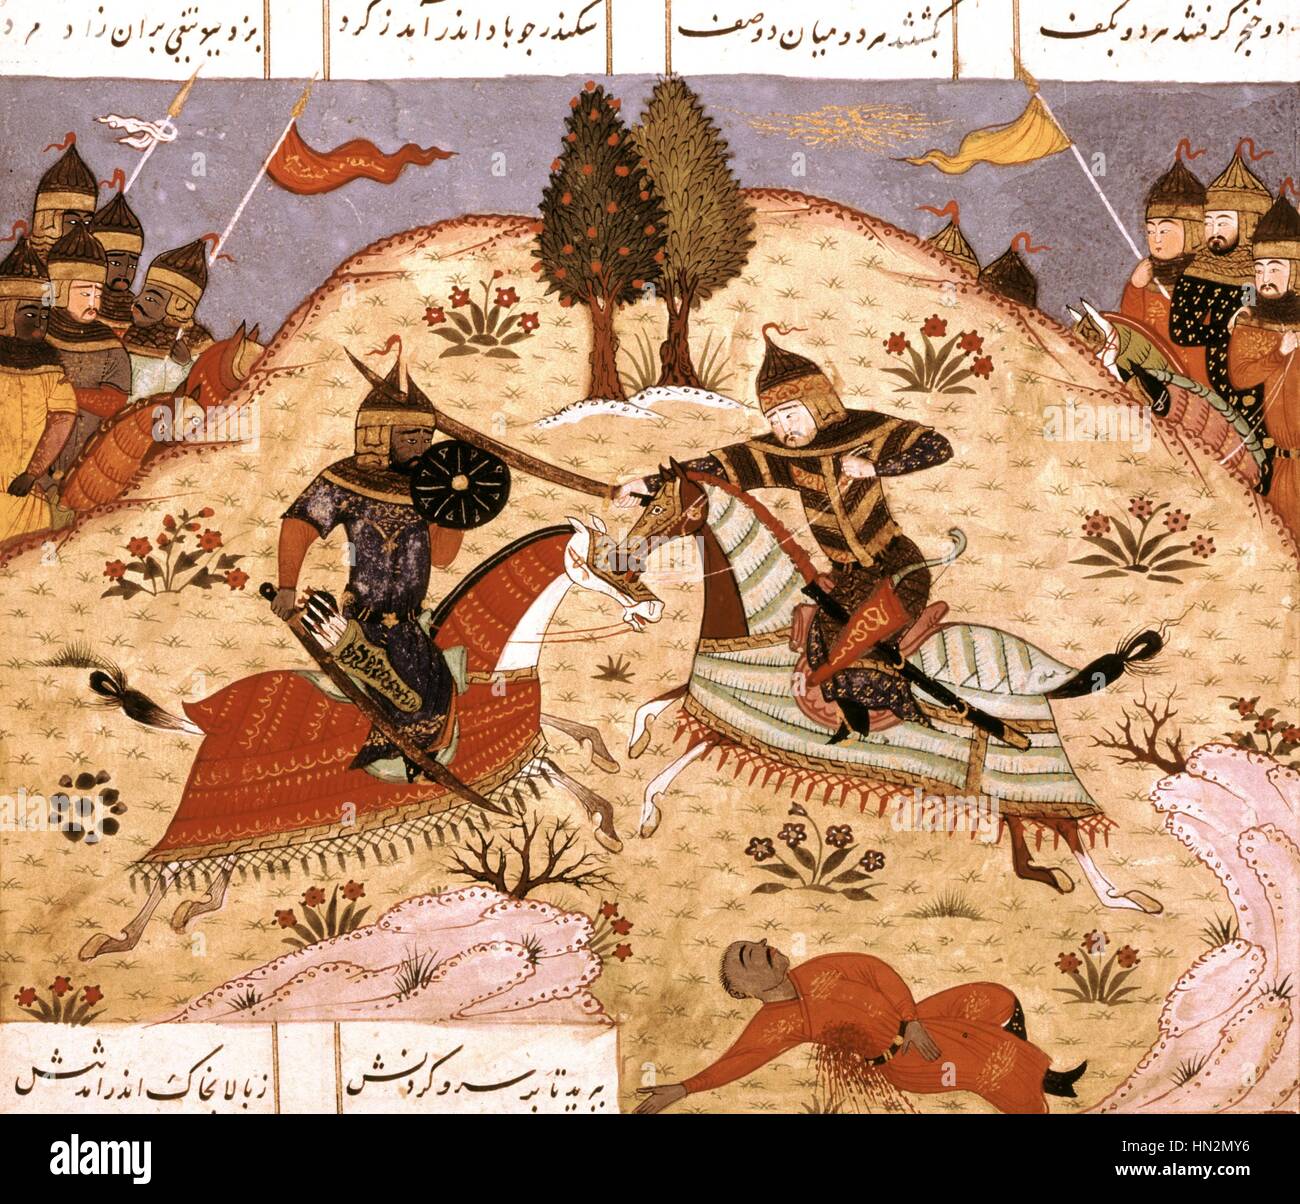 Persian manuscript Fight between Rustam and his son Sohrab, who do not recognize each other Late 15th century Persia London, British museum Stock Photo